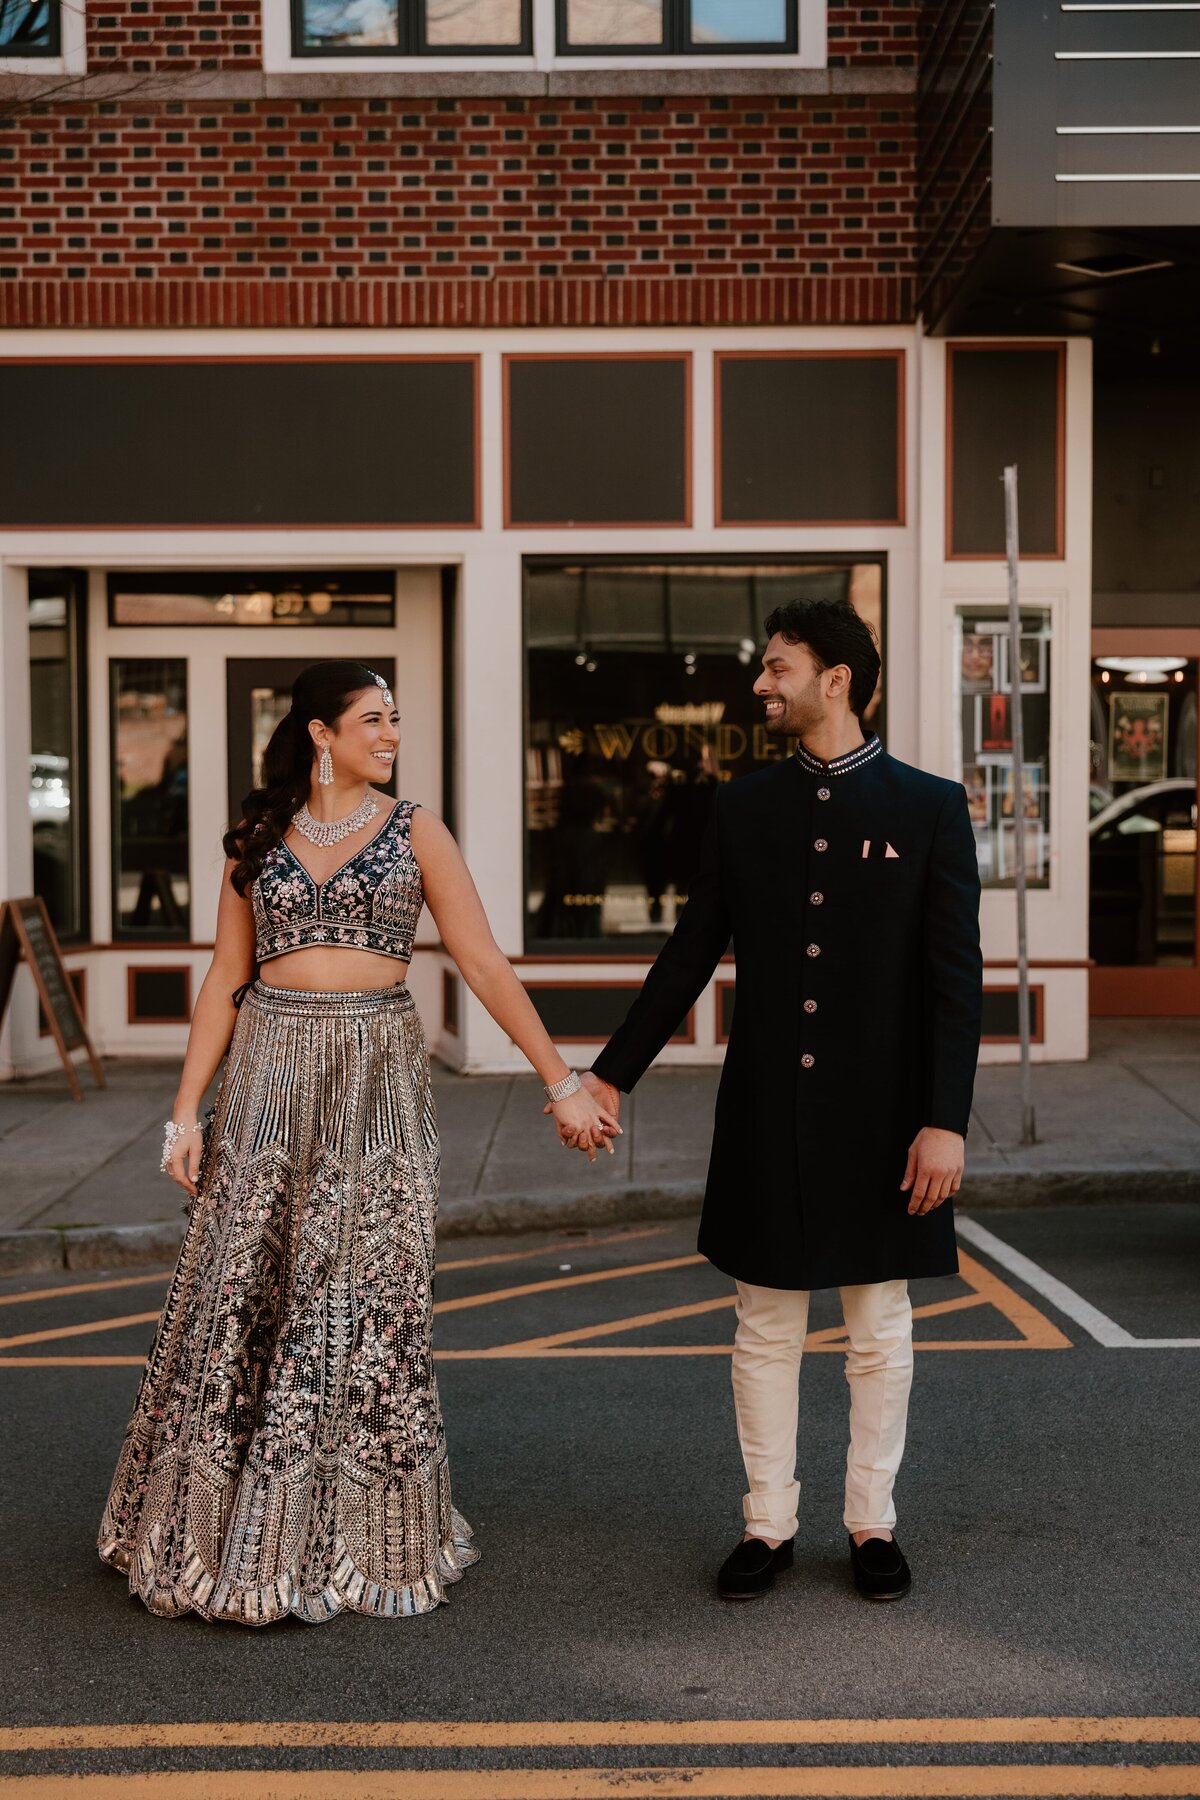 A couple dressed in traditional Indian attire smiles and holds hands in the middle of a street outside Wonderbar in Beacon, NY during a dinner rehearsal. The woman wears a detailed, shimmering lehenga, and the man sports an elegant sherwani with a mandarin collar.